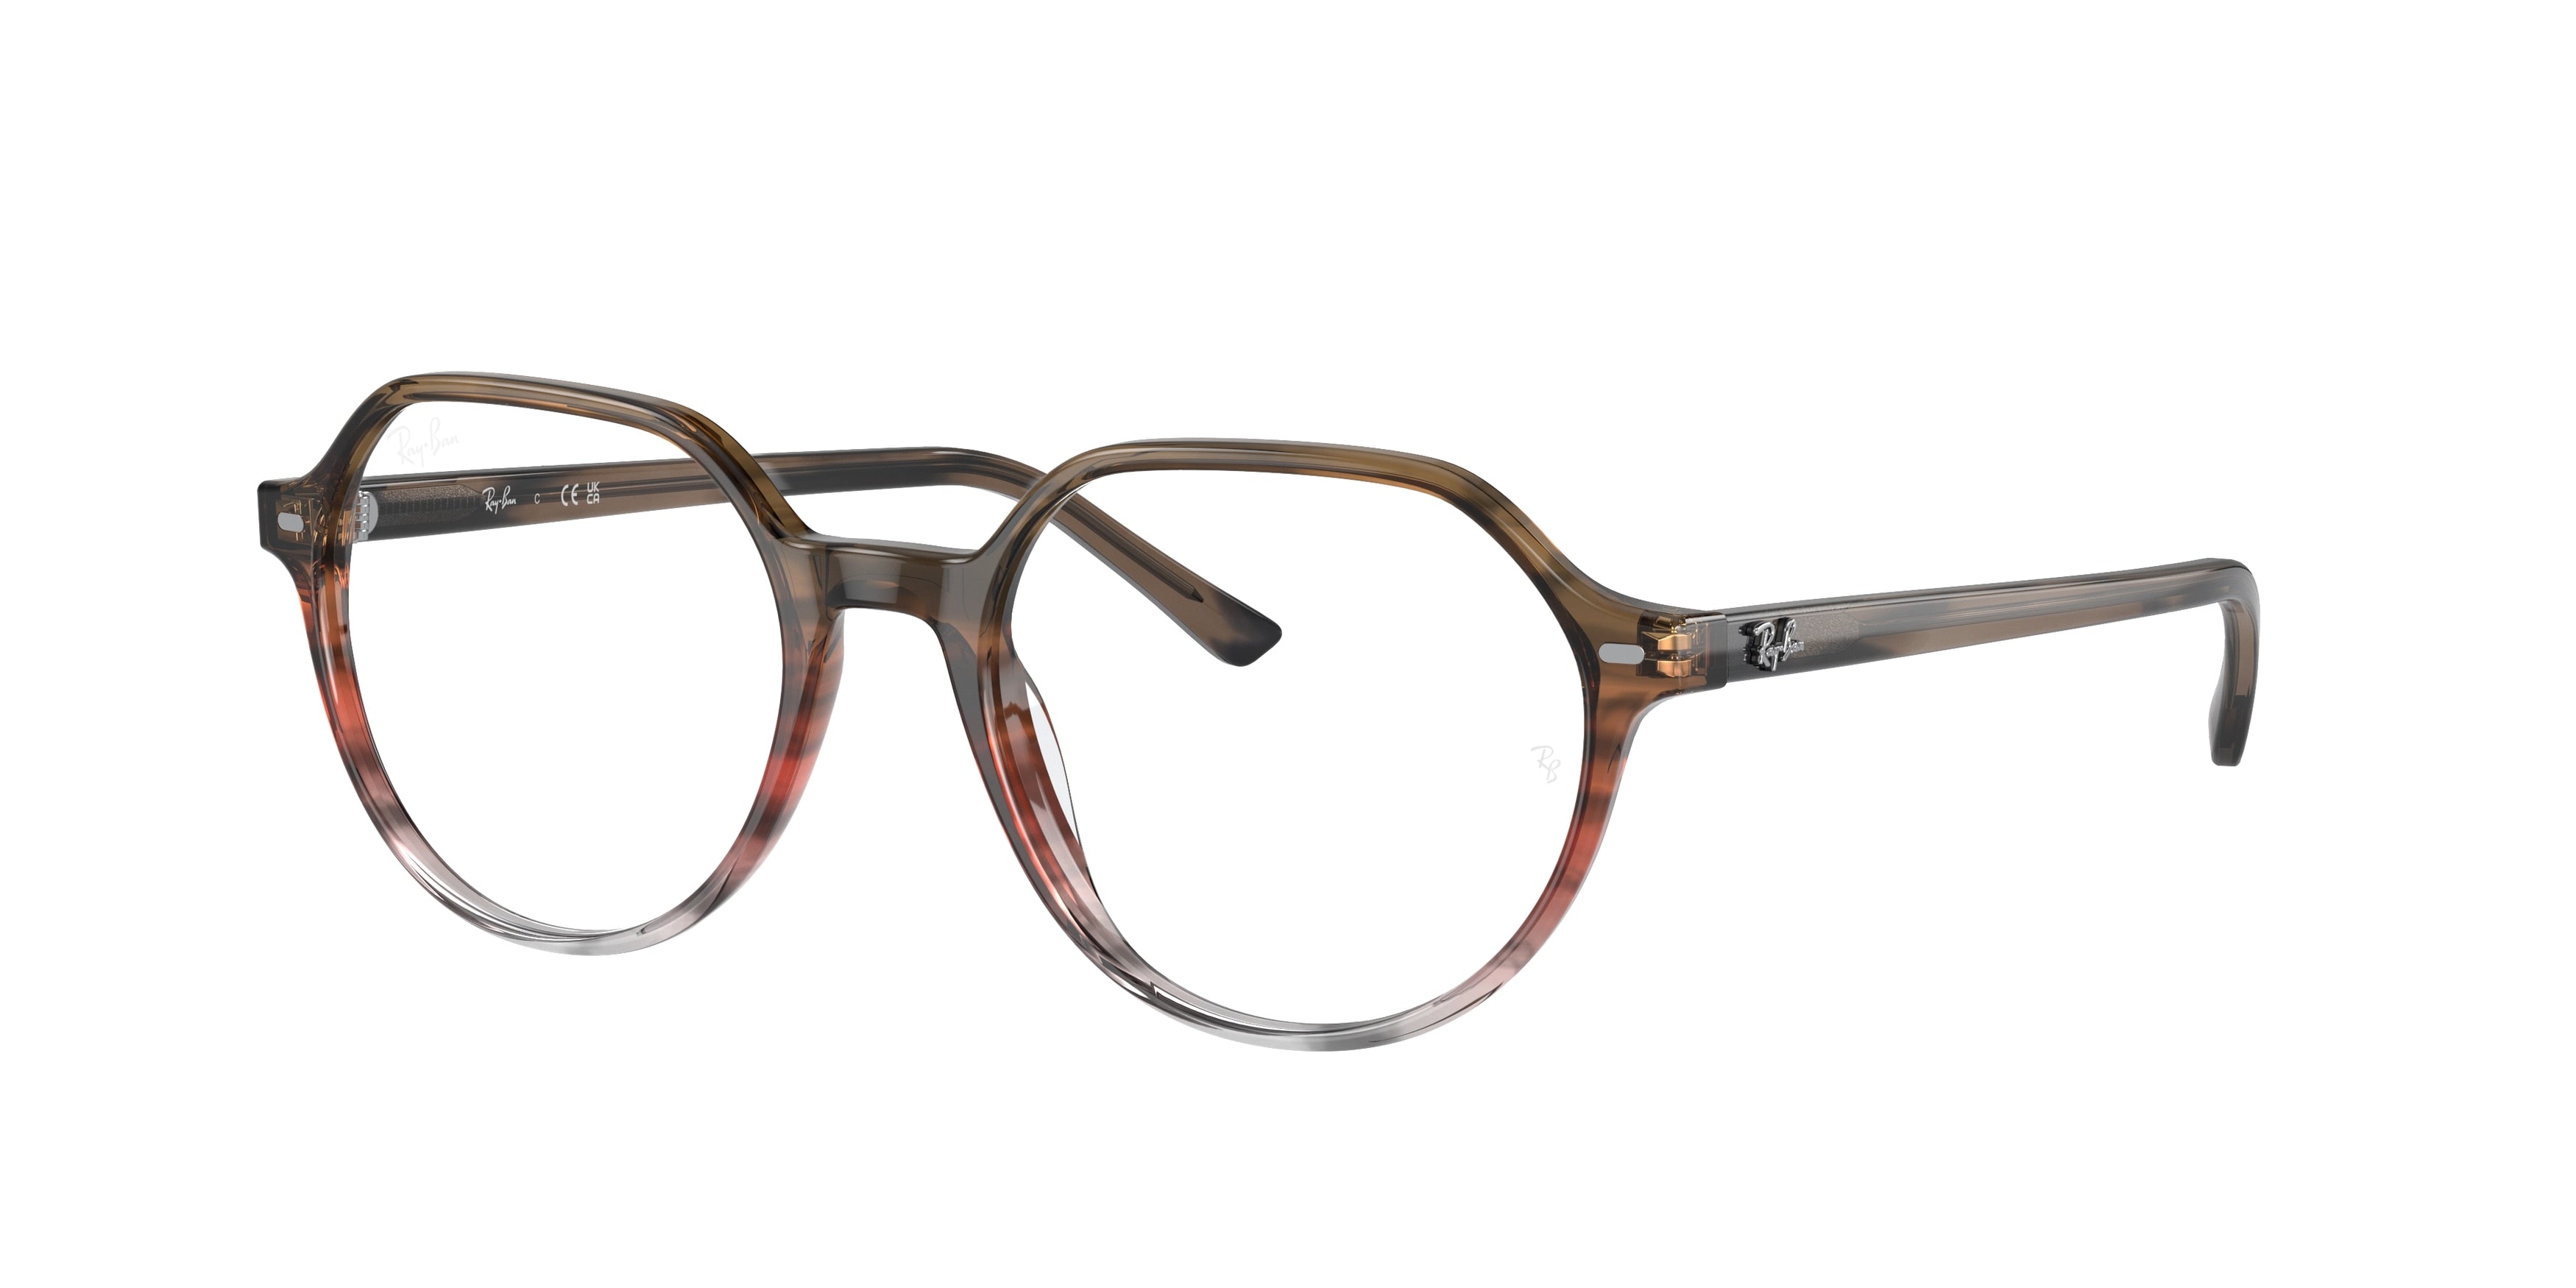 Ray-Ban Optical THALIA RX5395 Square Eyeglasses  8251-Striped Brown & Red 51-145-18 - Color Map Brown